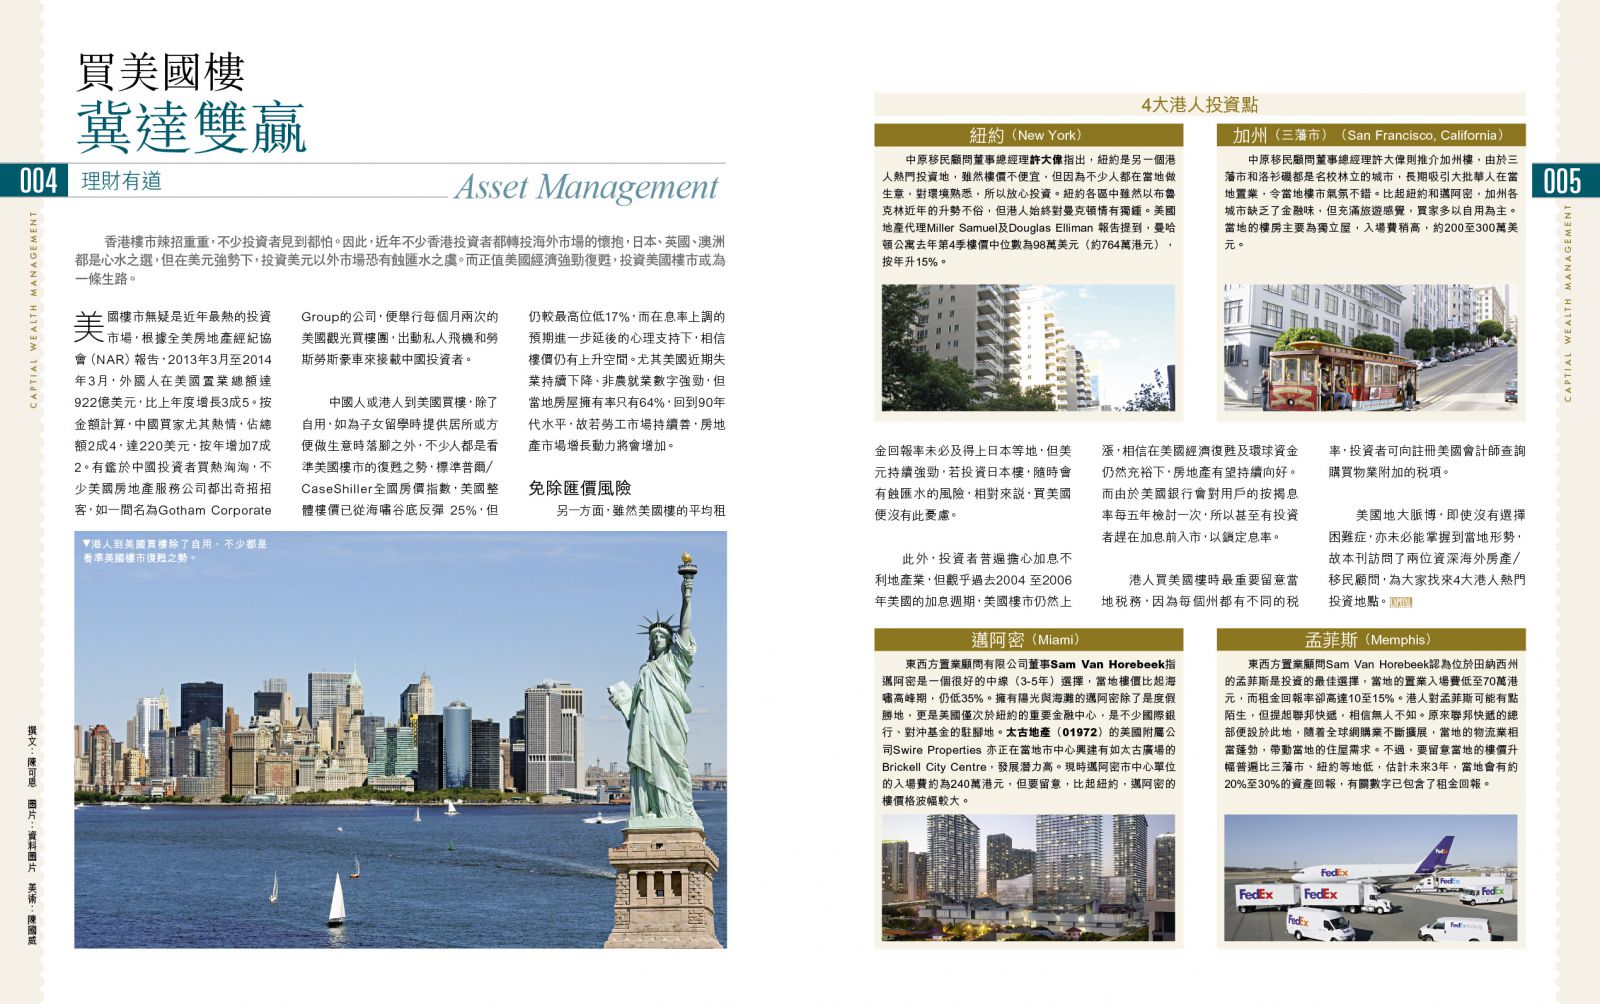 Chinese investors of US real estate